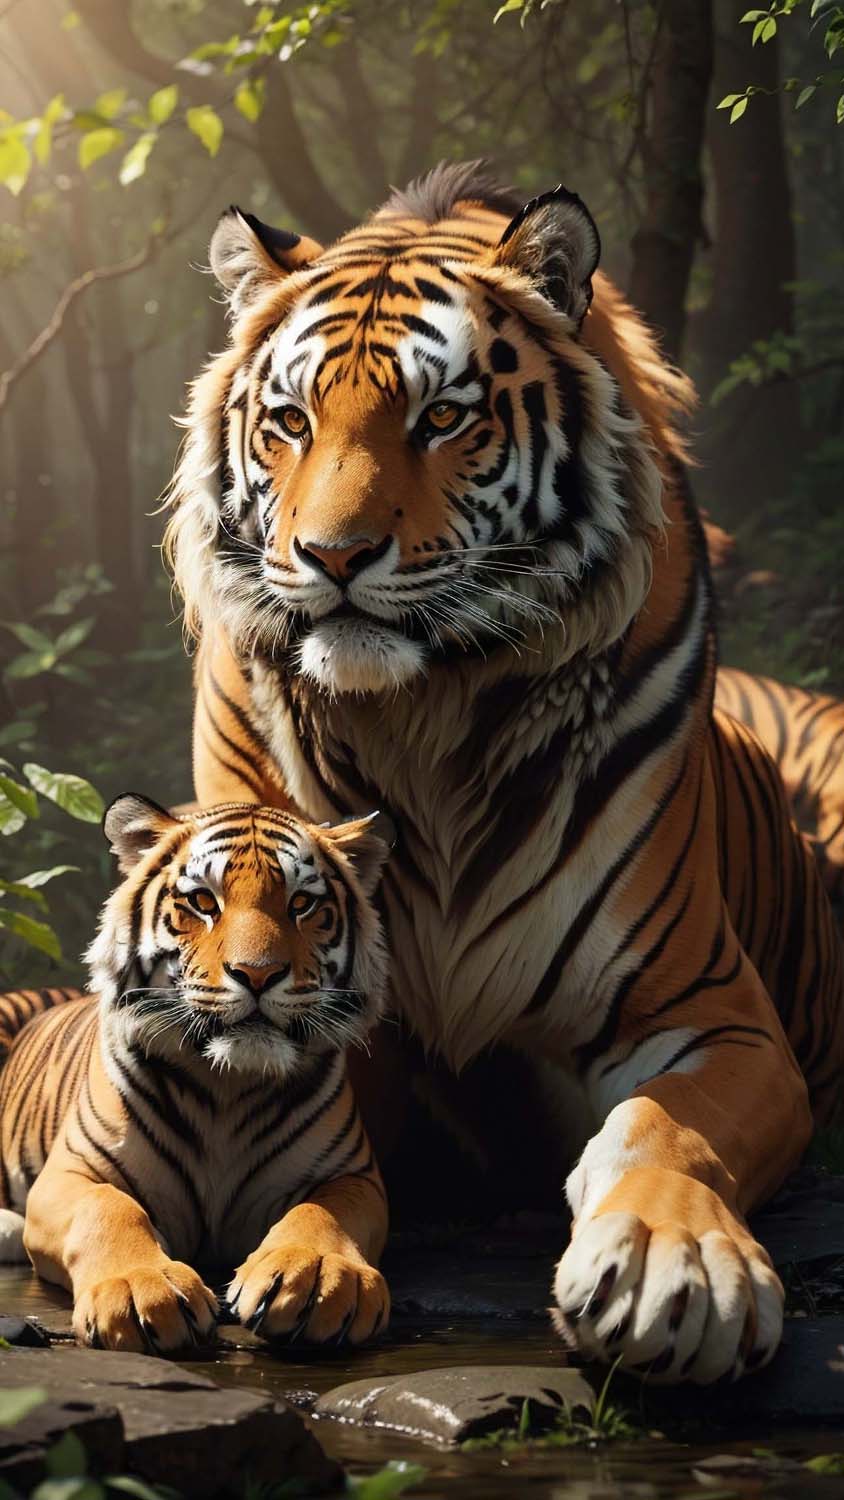 Tiger with Cub